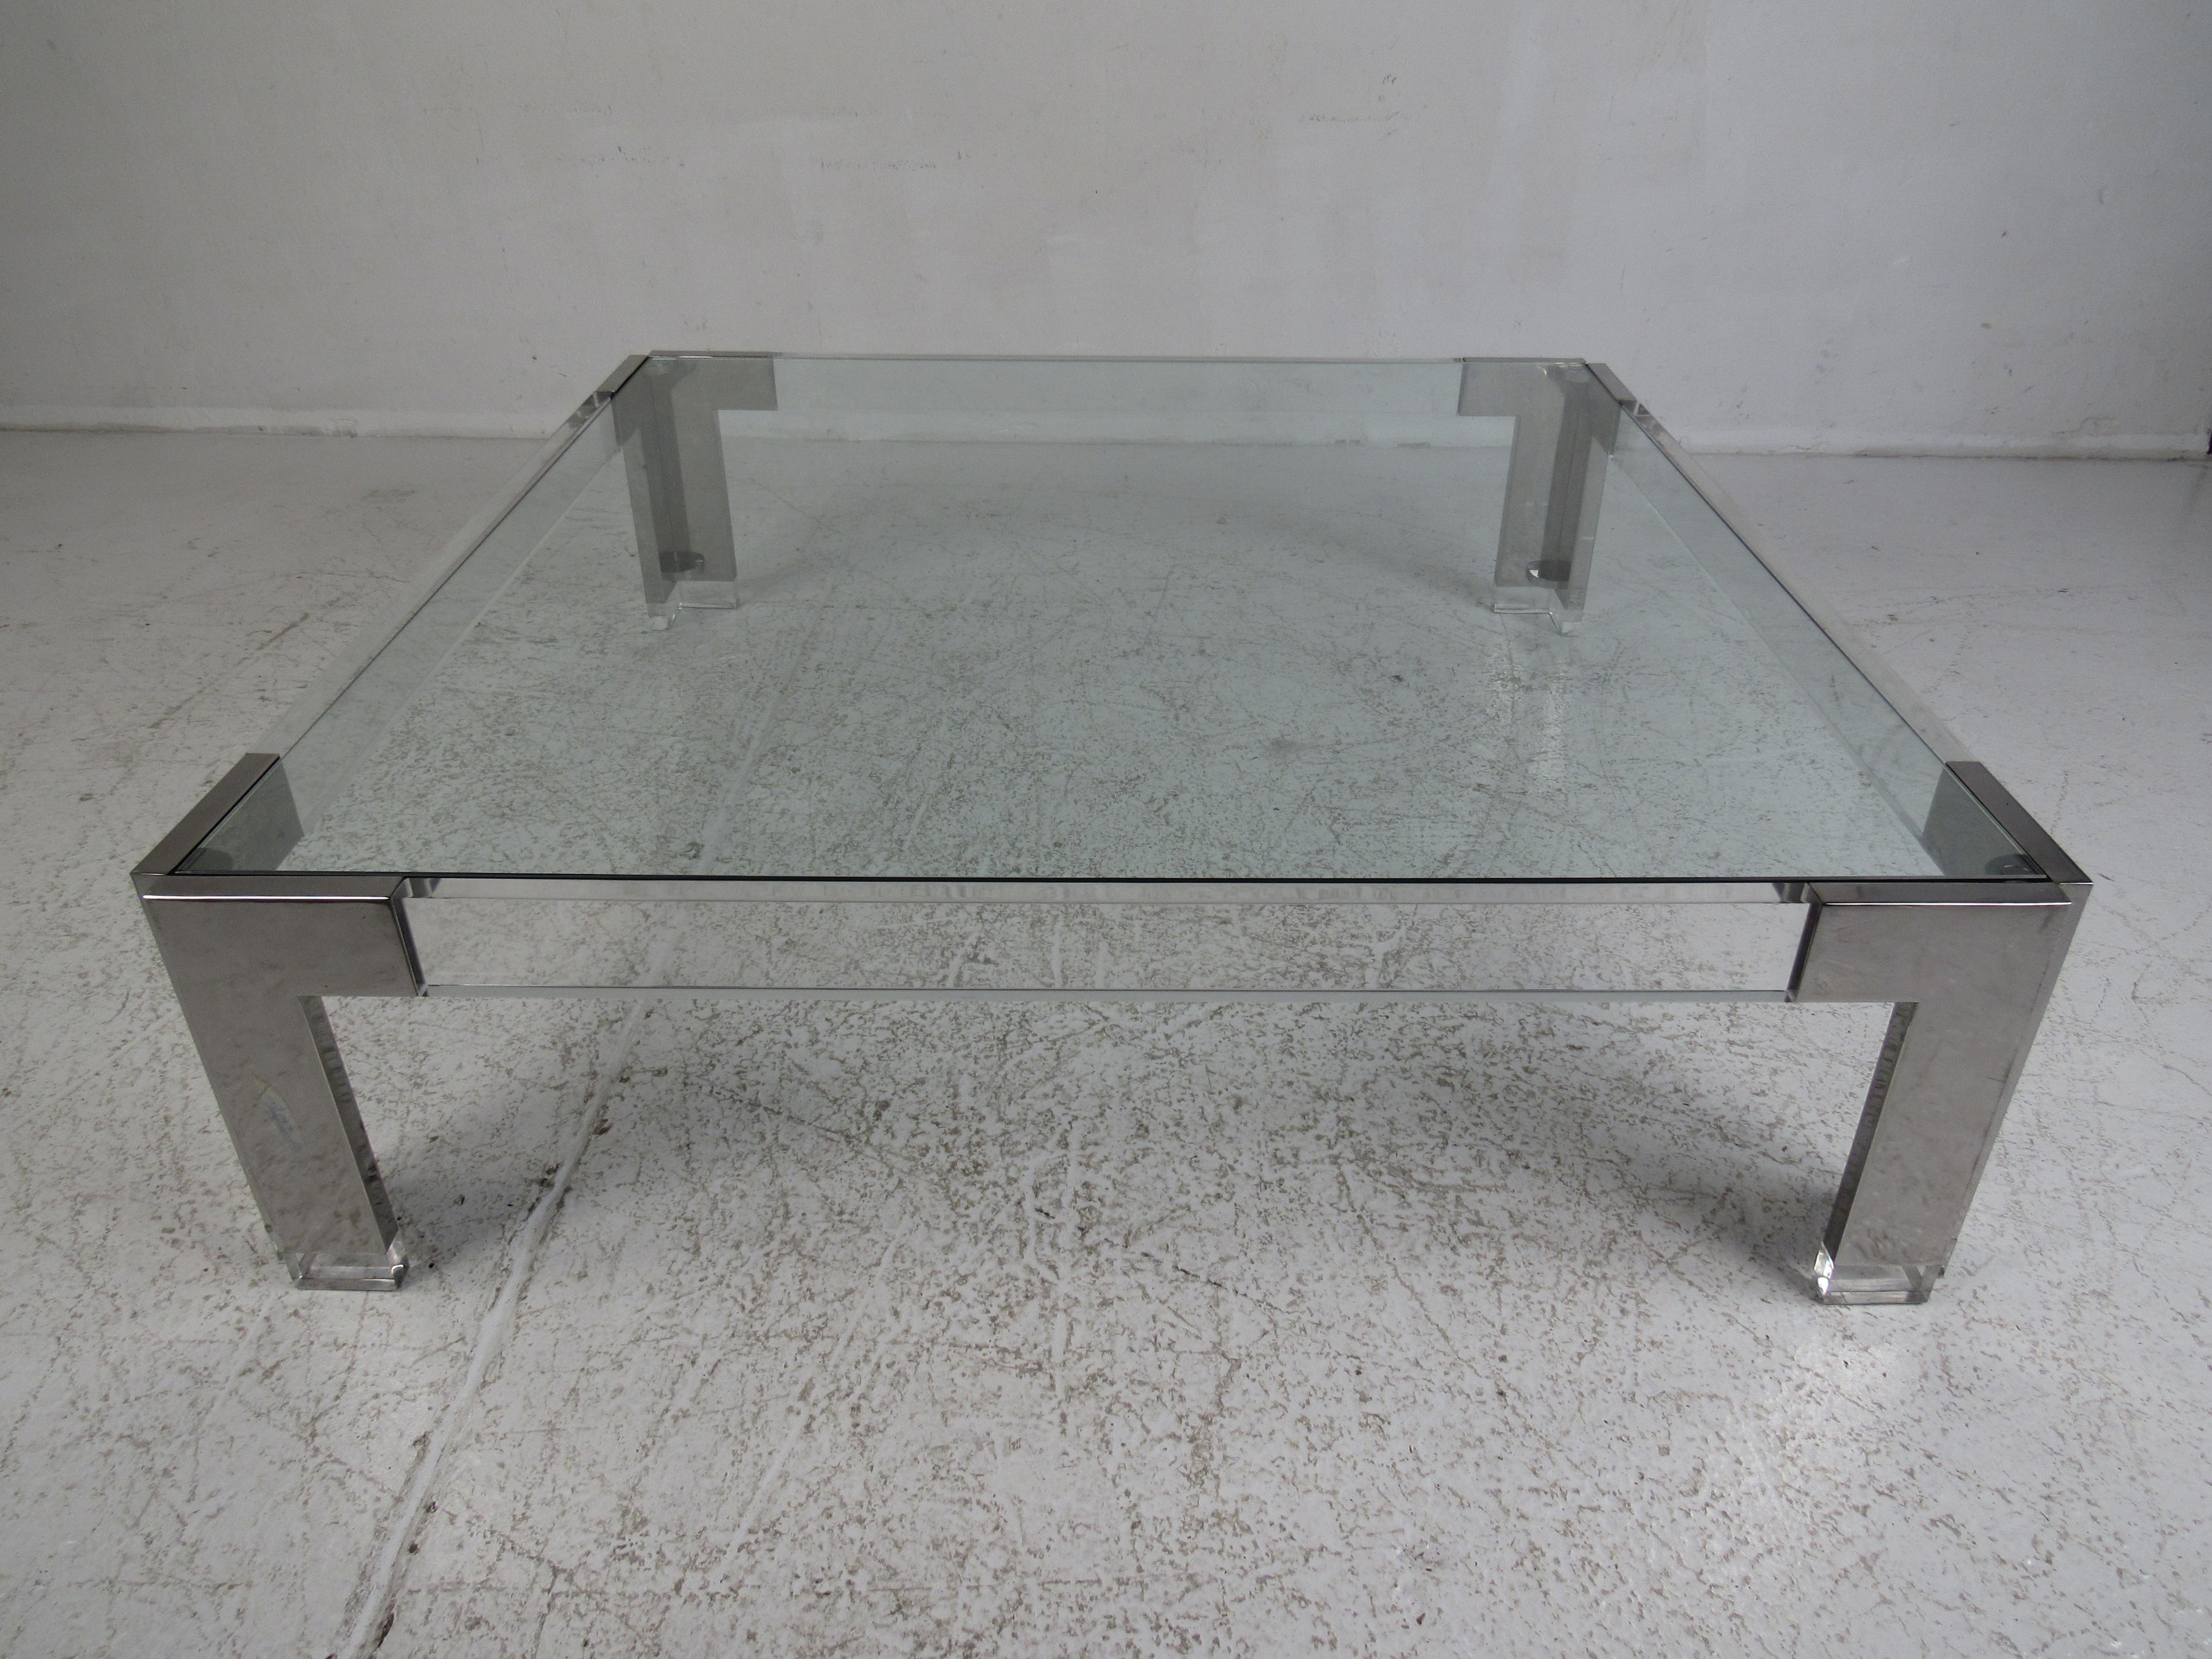 An elegant vintage modern coffee table with a Lucite and chrome base. The impressive two-tone design adds style and grace to any modern interior. A large square glass top rests comfortably on top of the sturdy base ensuring plenty of space for